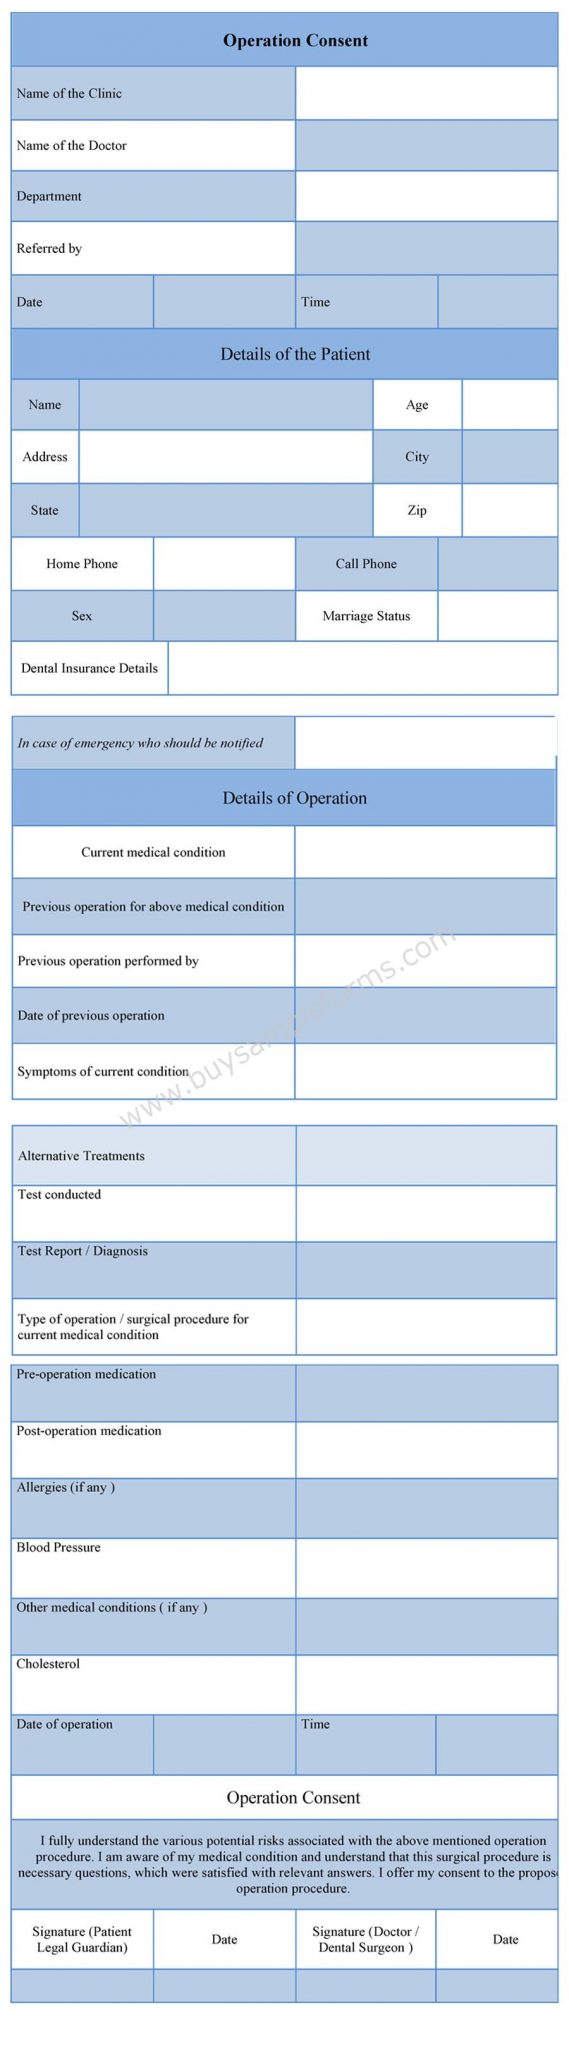 Operation Consent Form sample